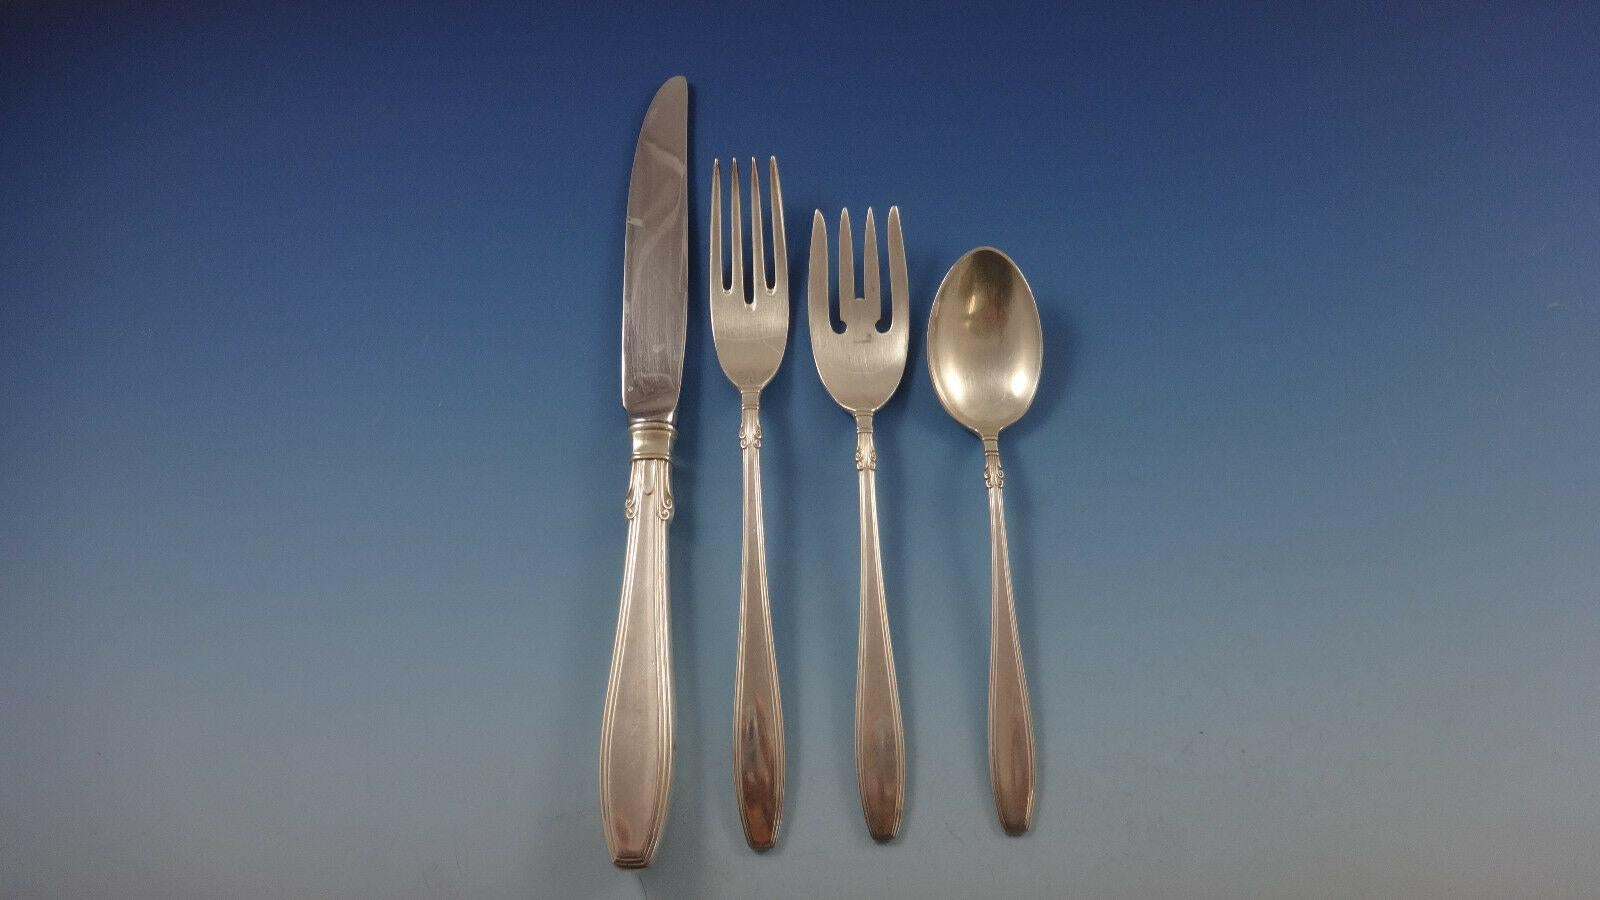 Nocturne by Gorham sterling silver flatware set, 38 pieces. This pattern has a great look! This set includes:

8 knives, 9